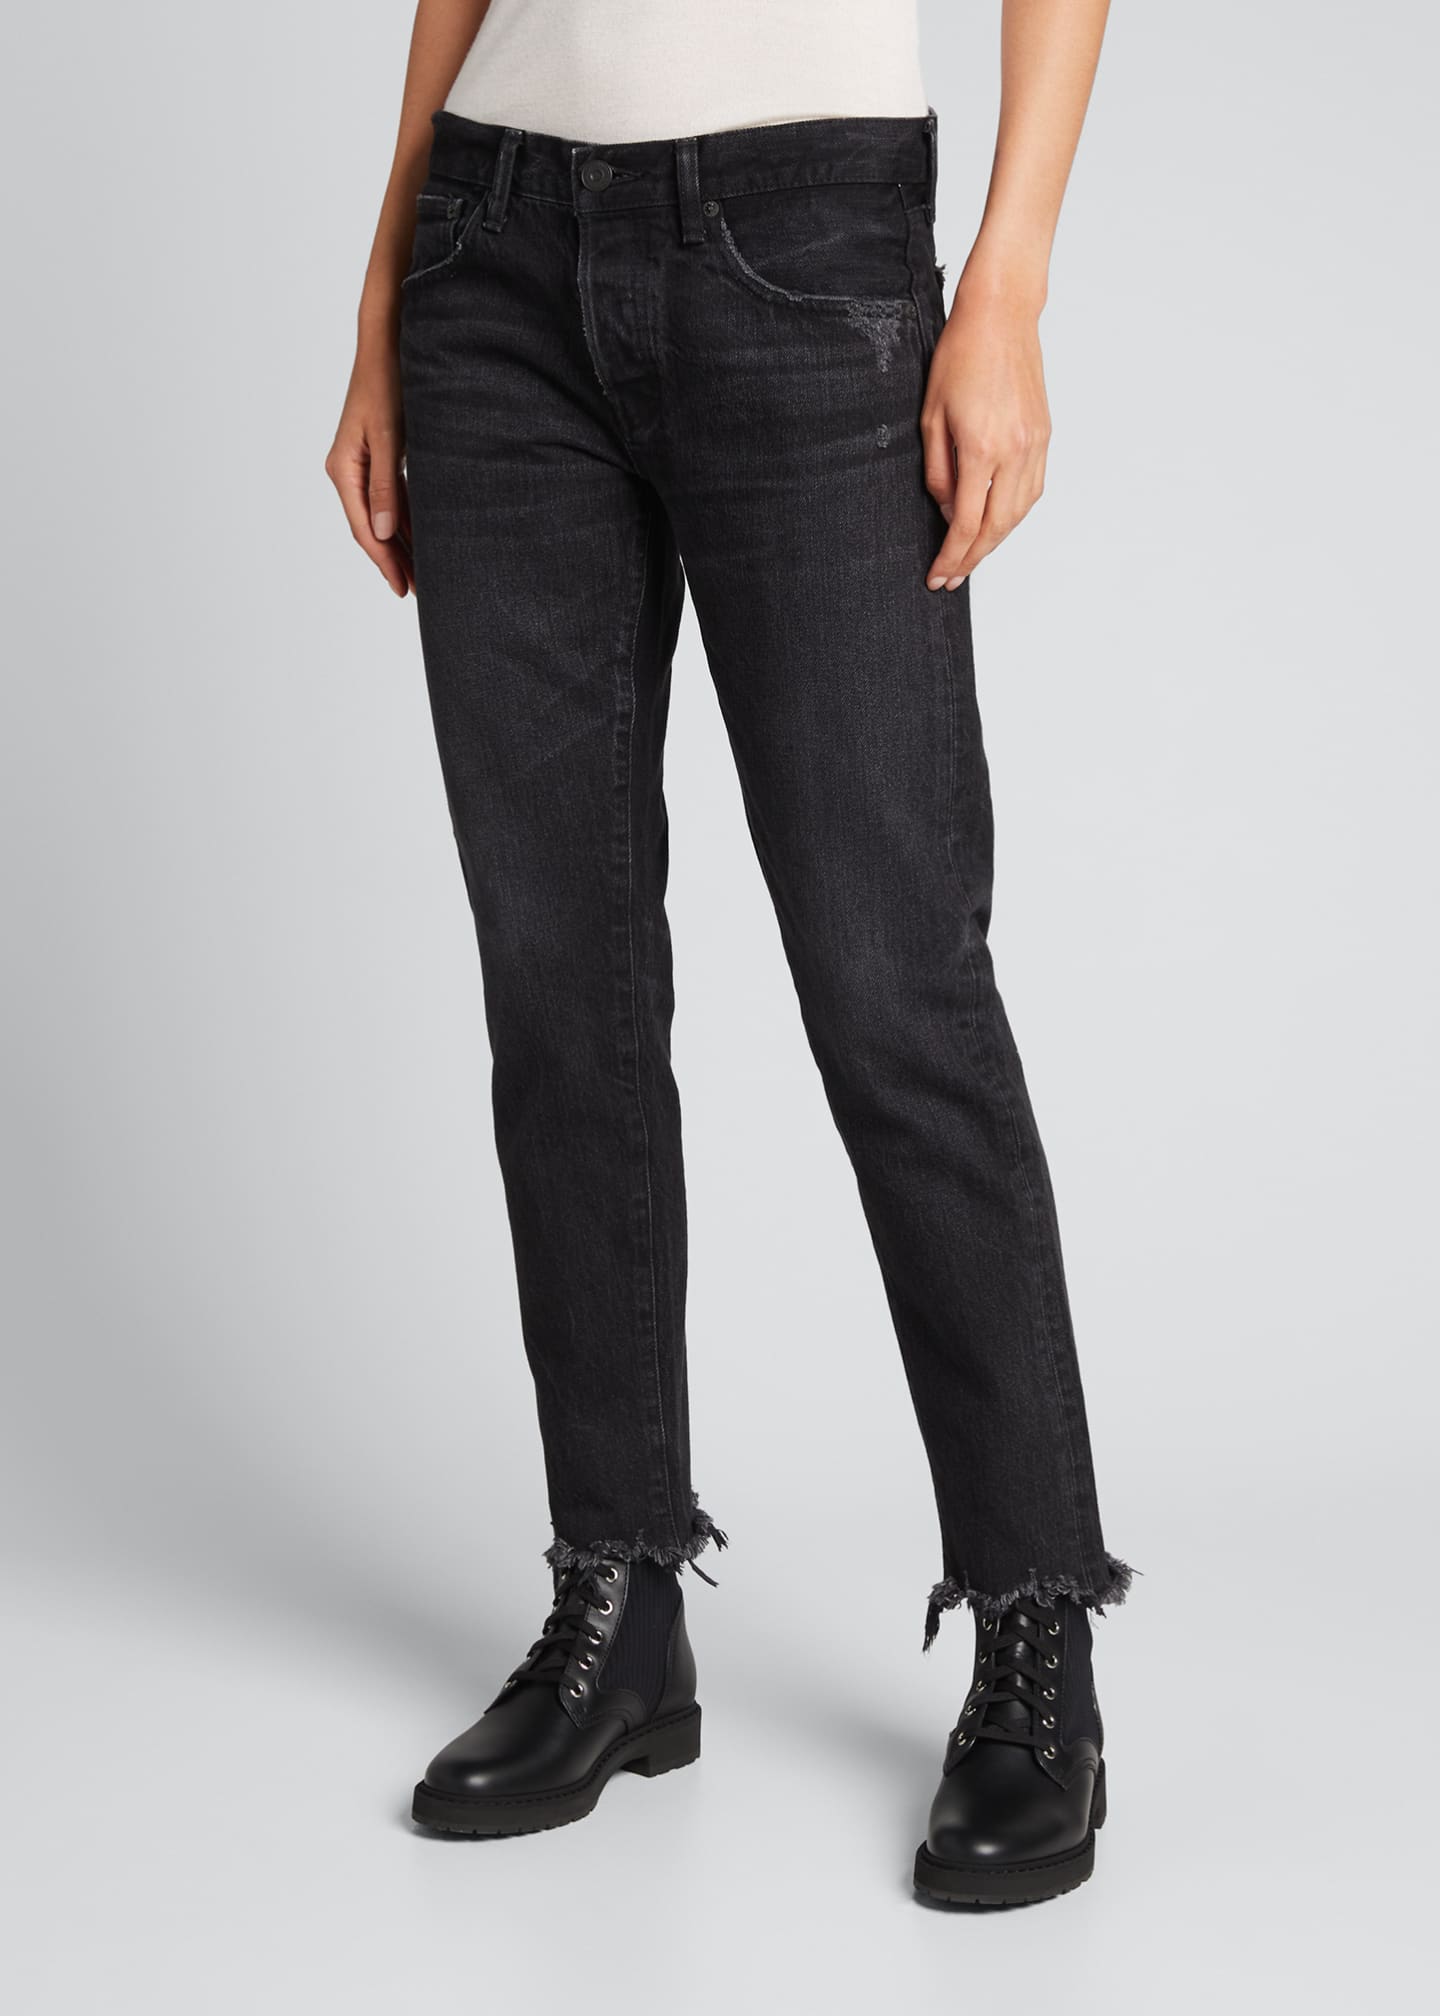 MOUSSY VINTAGE Staley Tapered Ankle Jeans with Shredded Hem - Bergdorf ...